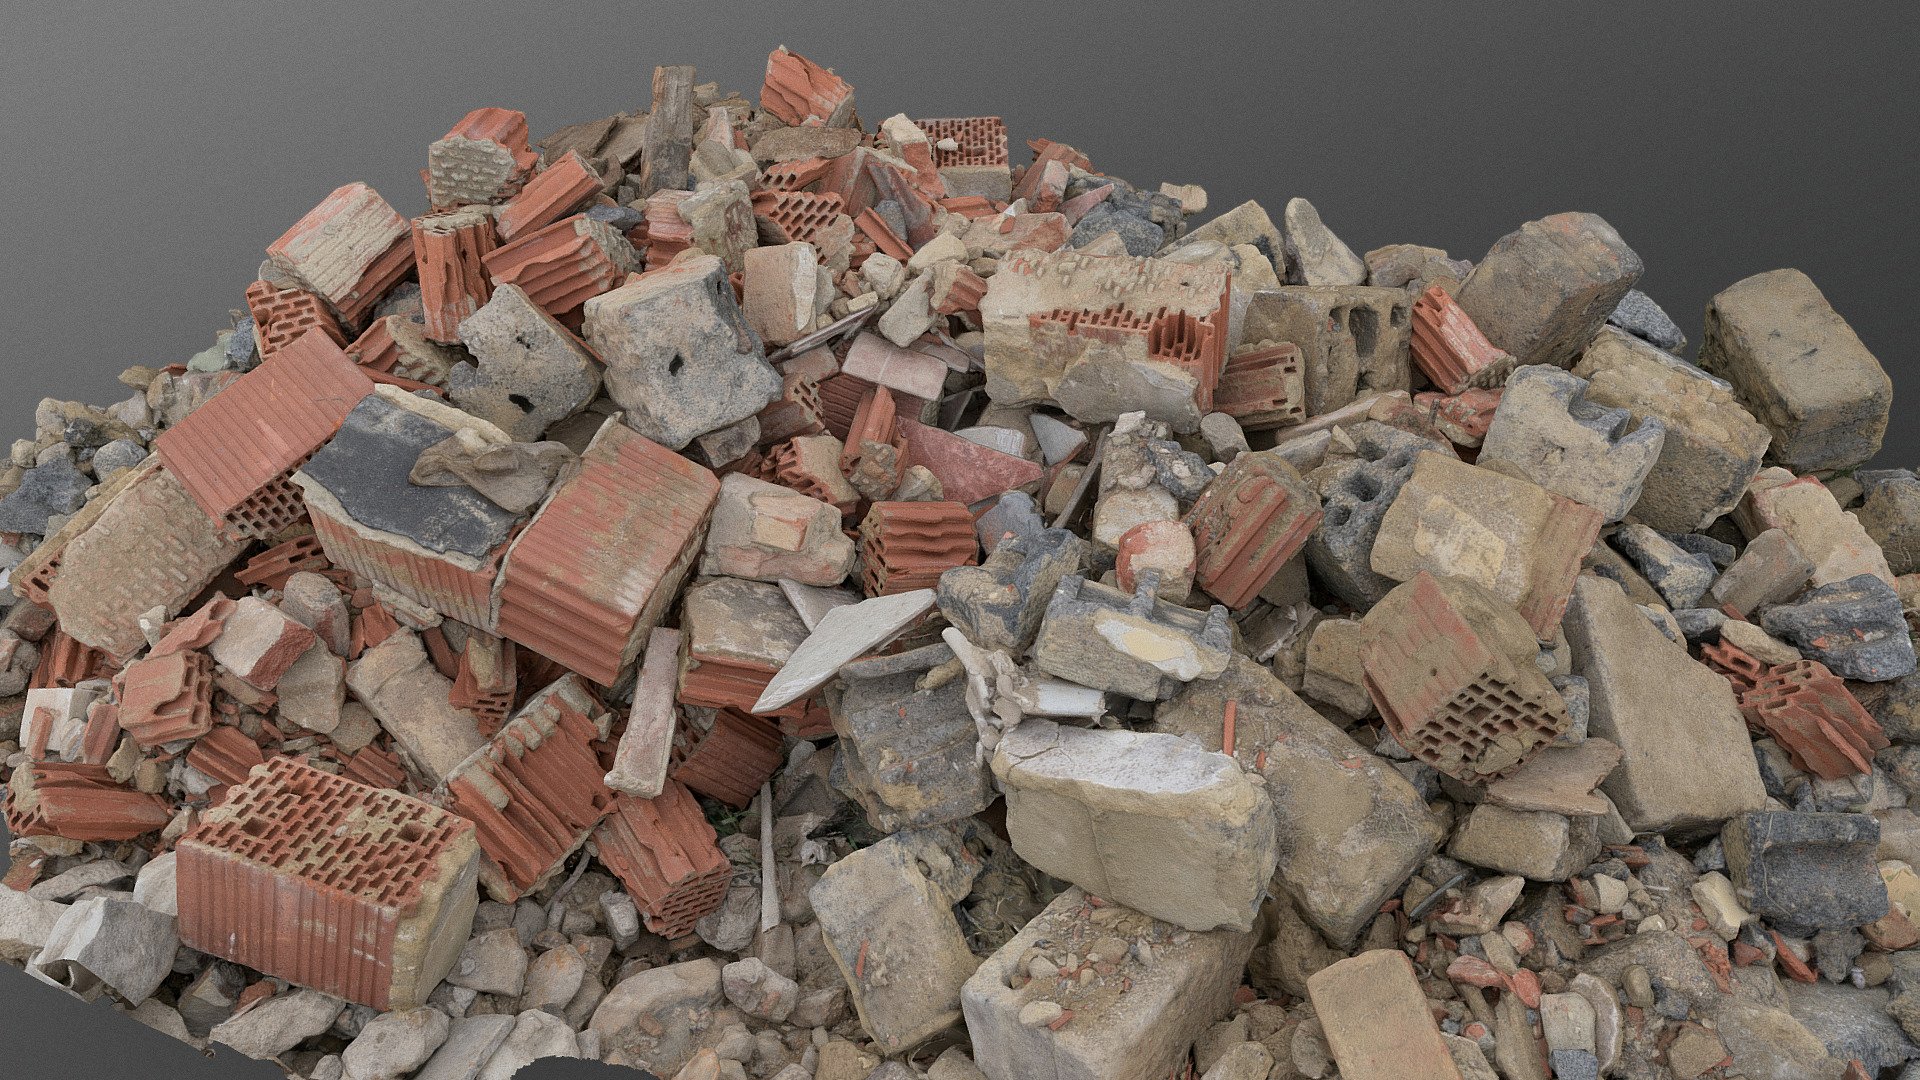 Building demolition demolished ruin White gray bricks and stones rubble debris pieces pile heap of scrap house material

photogrammetry scan (140x36mp), 5x8k textures + HD normals - Big rubble pile - Buy Royalty Free 3D model by matousekfoto 3d model